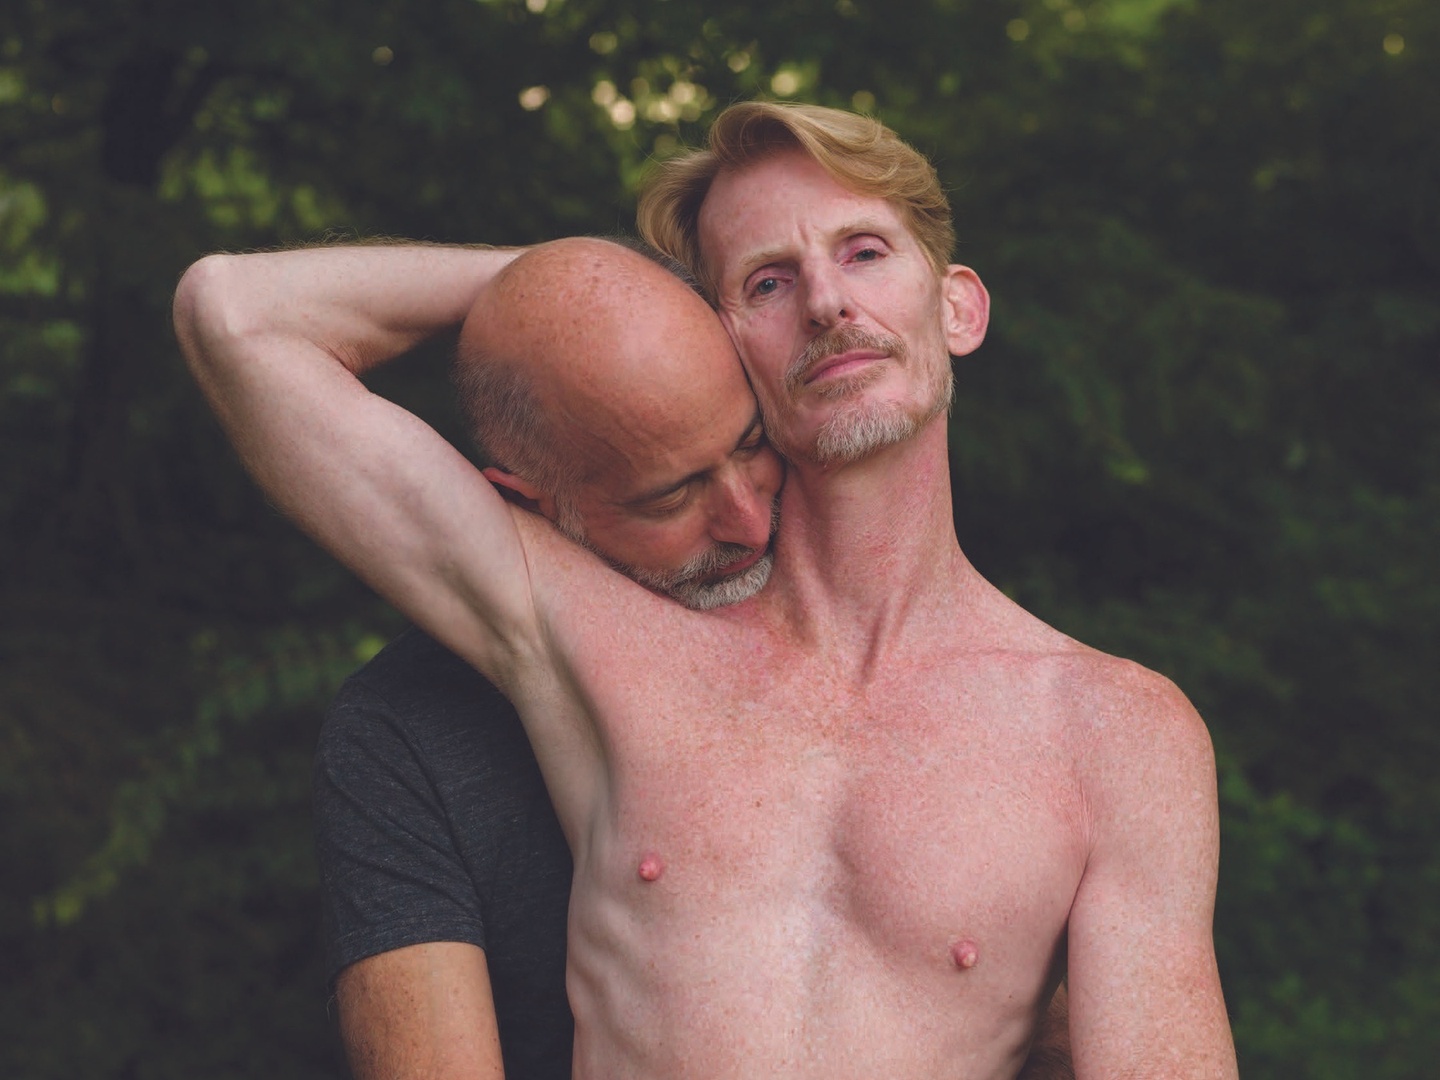 A shirtless person shown from the chest up, standing in front of another person with their arm cradling the head of the person standing behind.